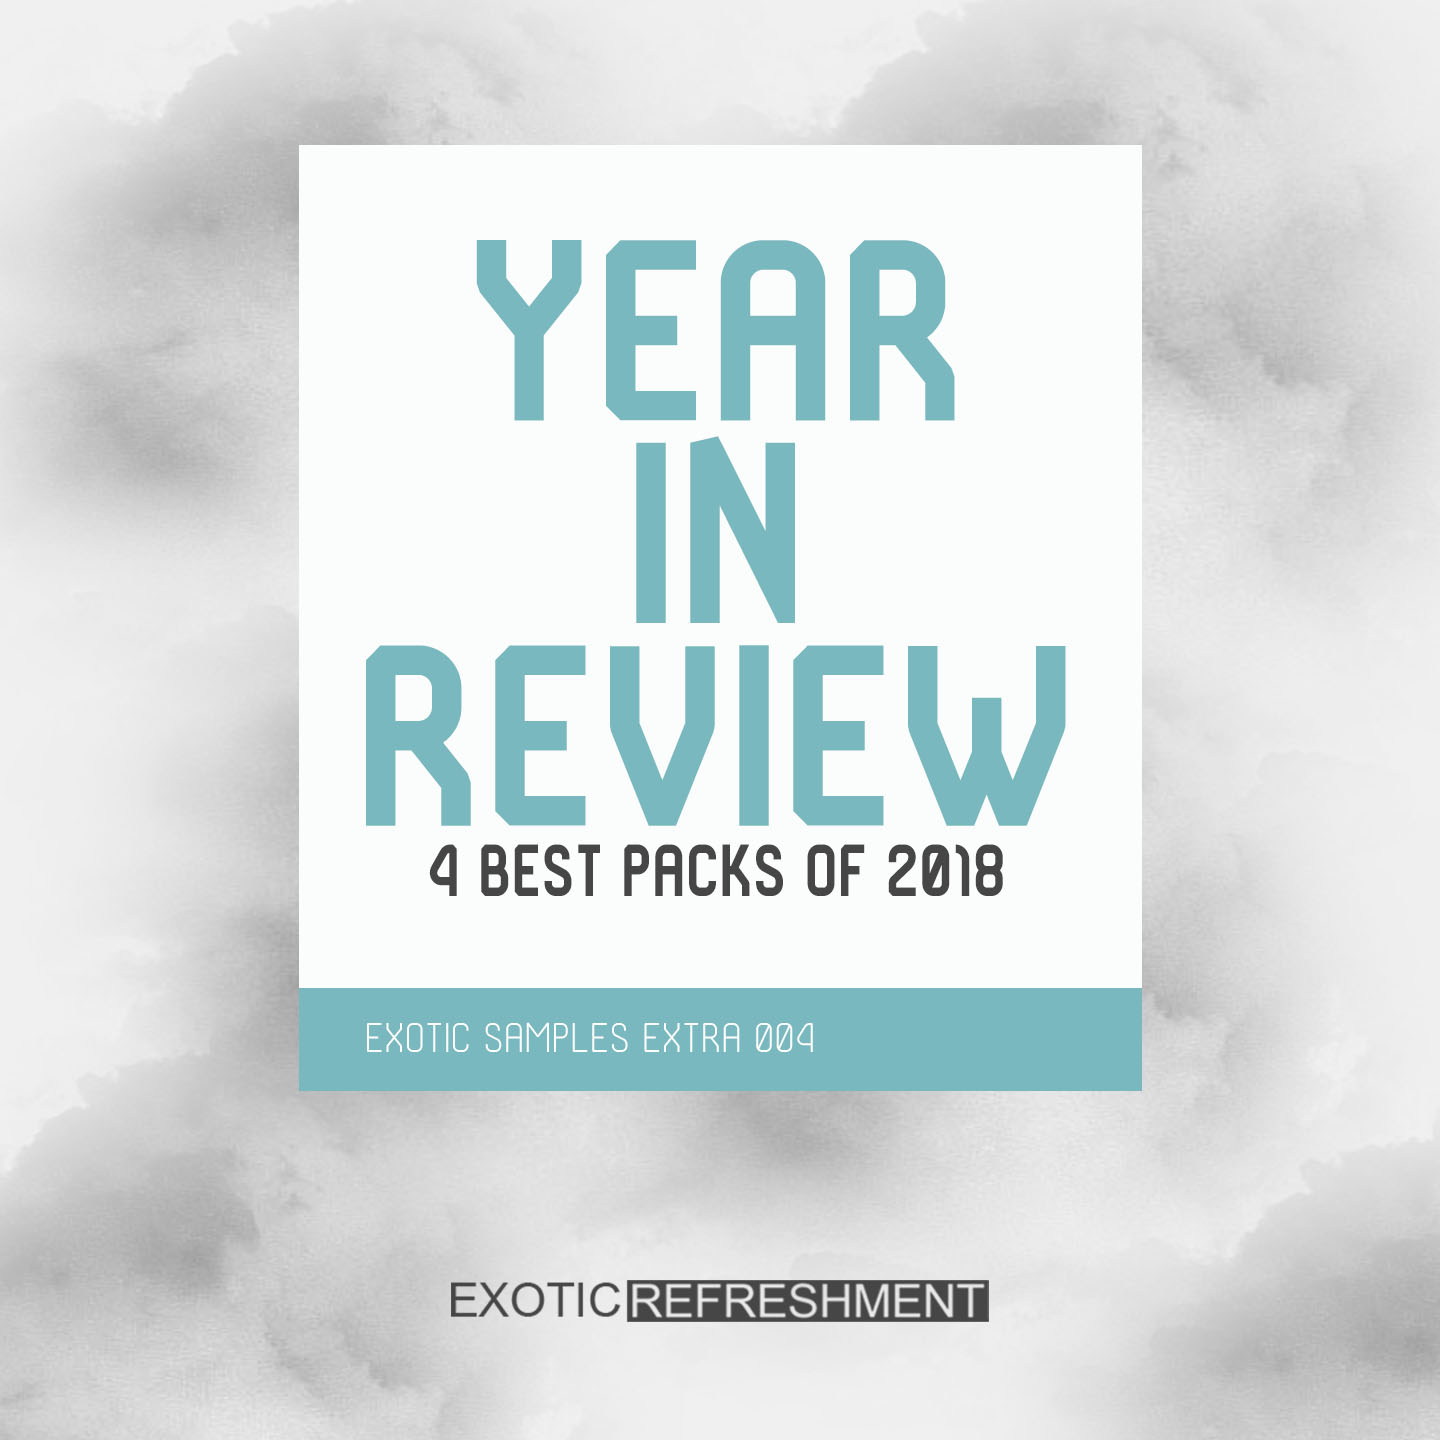 Exotic Samples Extra 004 - Year in Review